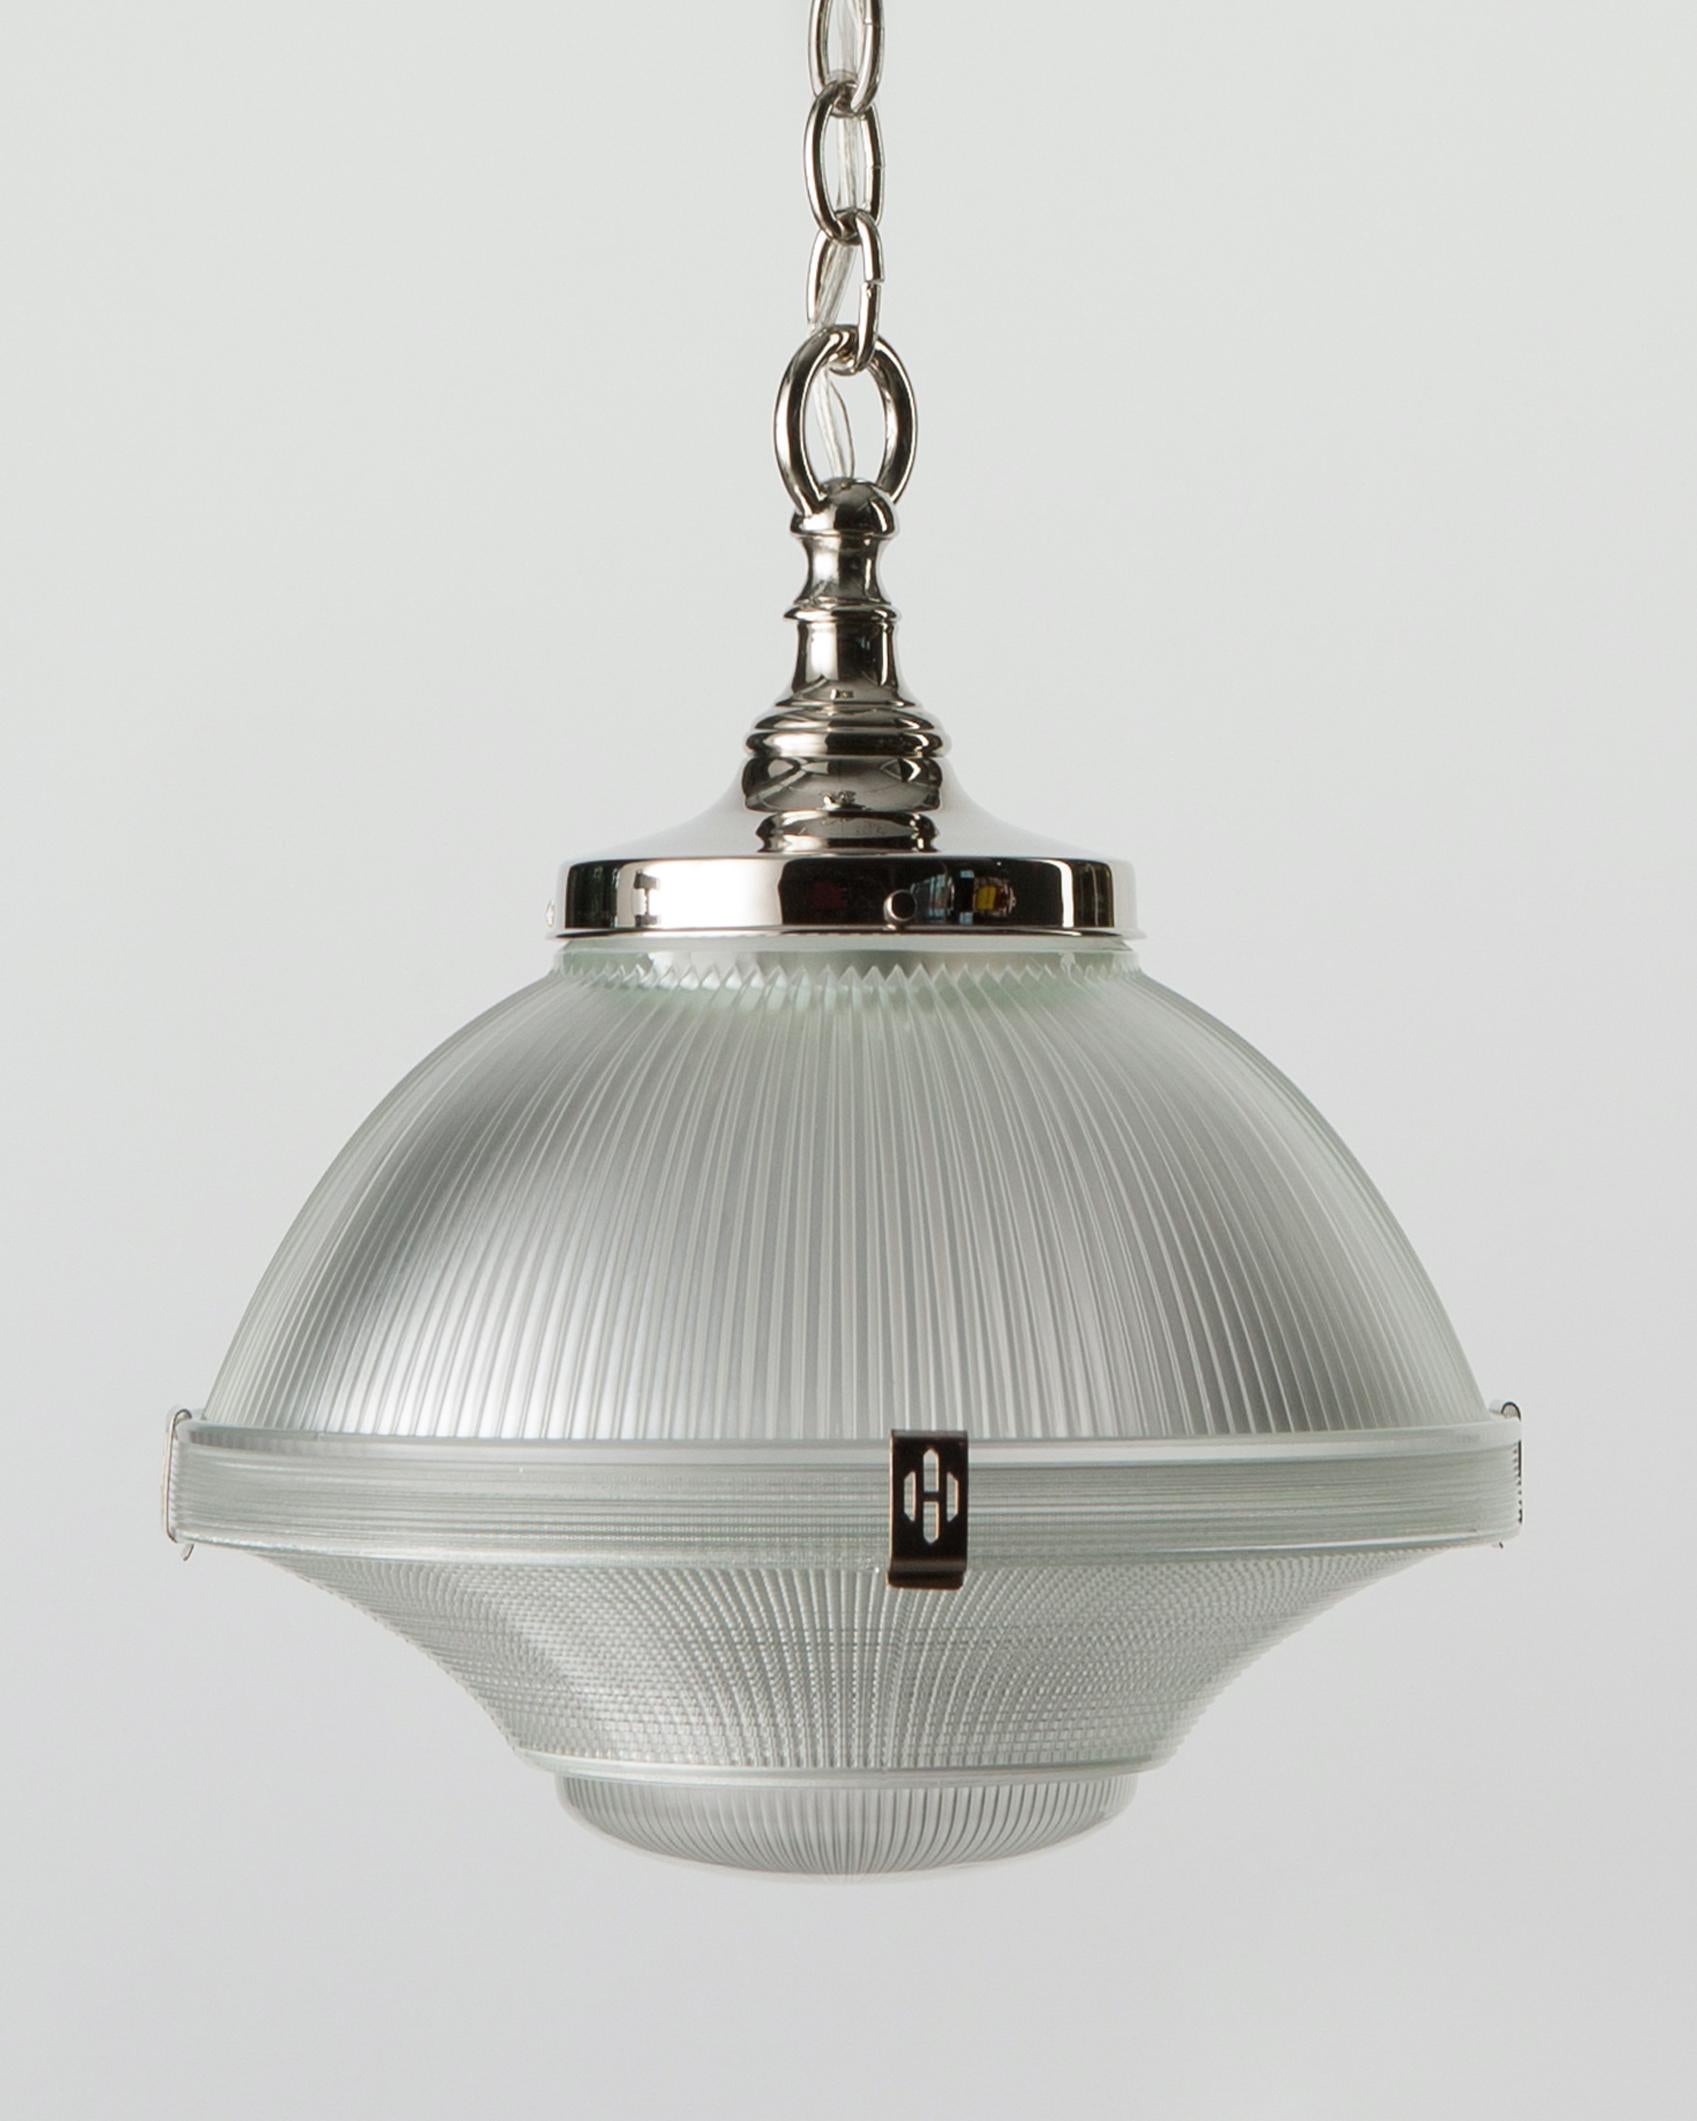 AHL3760
A three part holophane pendant, the vintage 1930s glass suspended from new polished nickel fittings made in the Remains Lighting Co. workshop. The top pieces are held together with decorative clips and the original bottom diffuser is